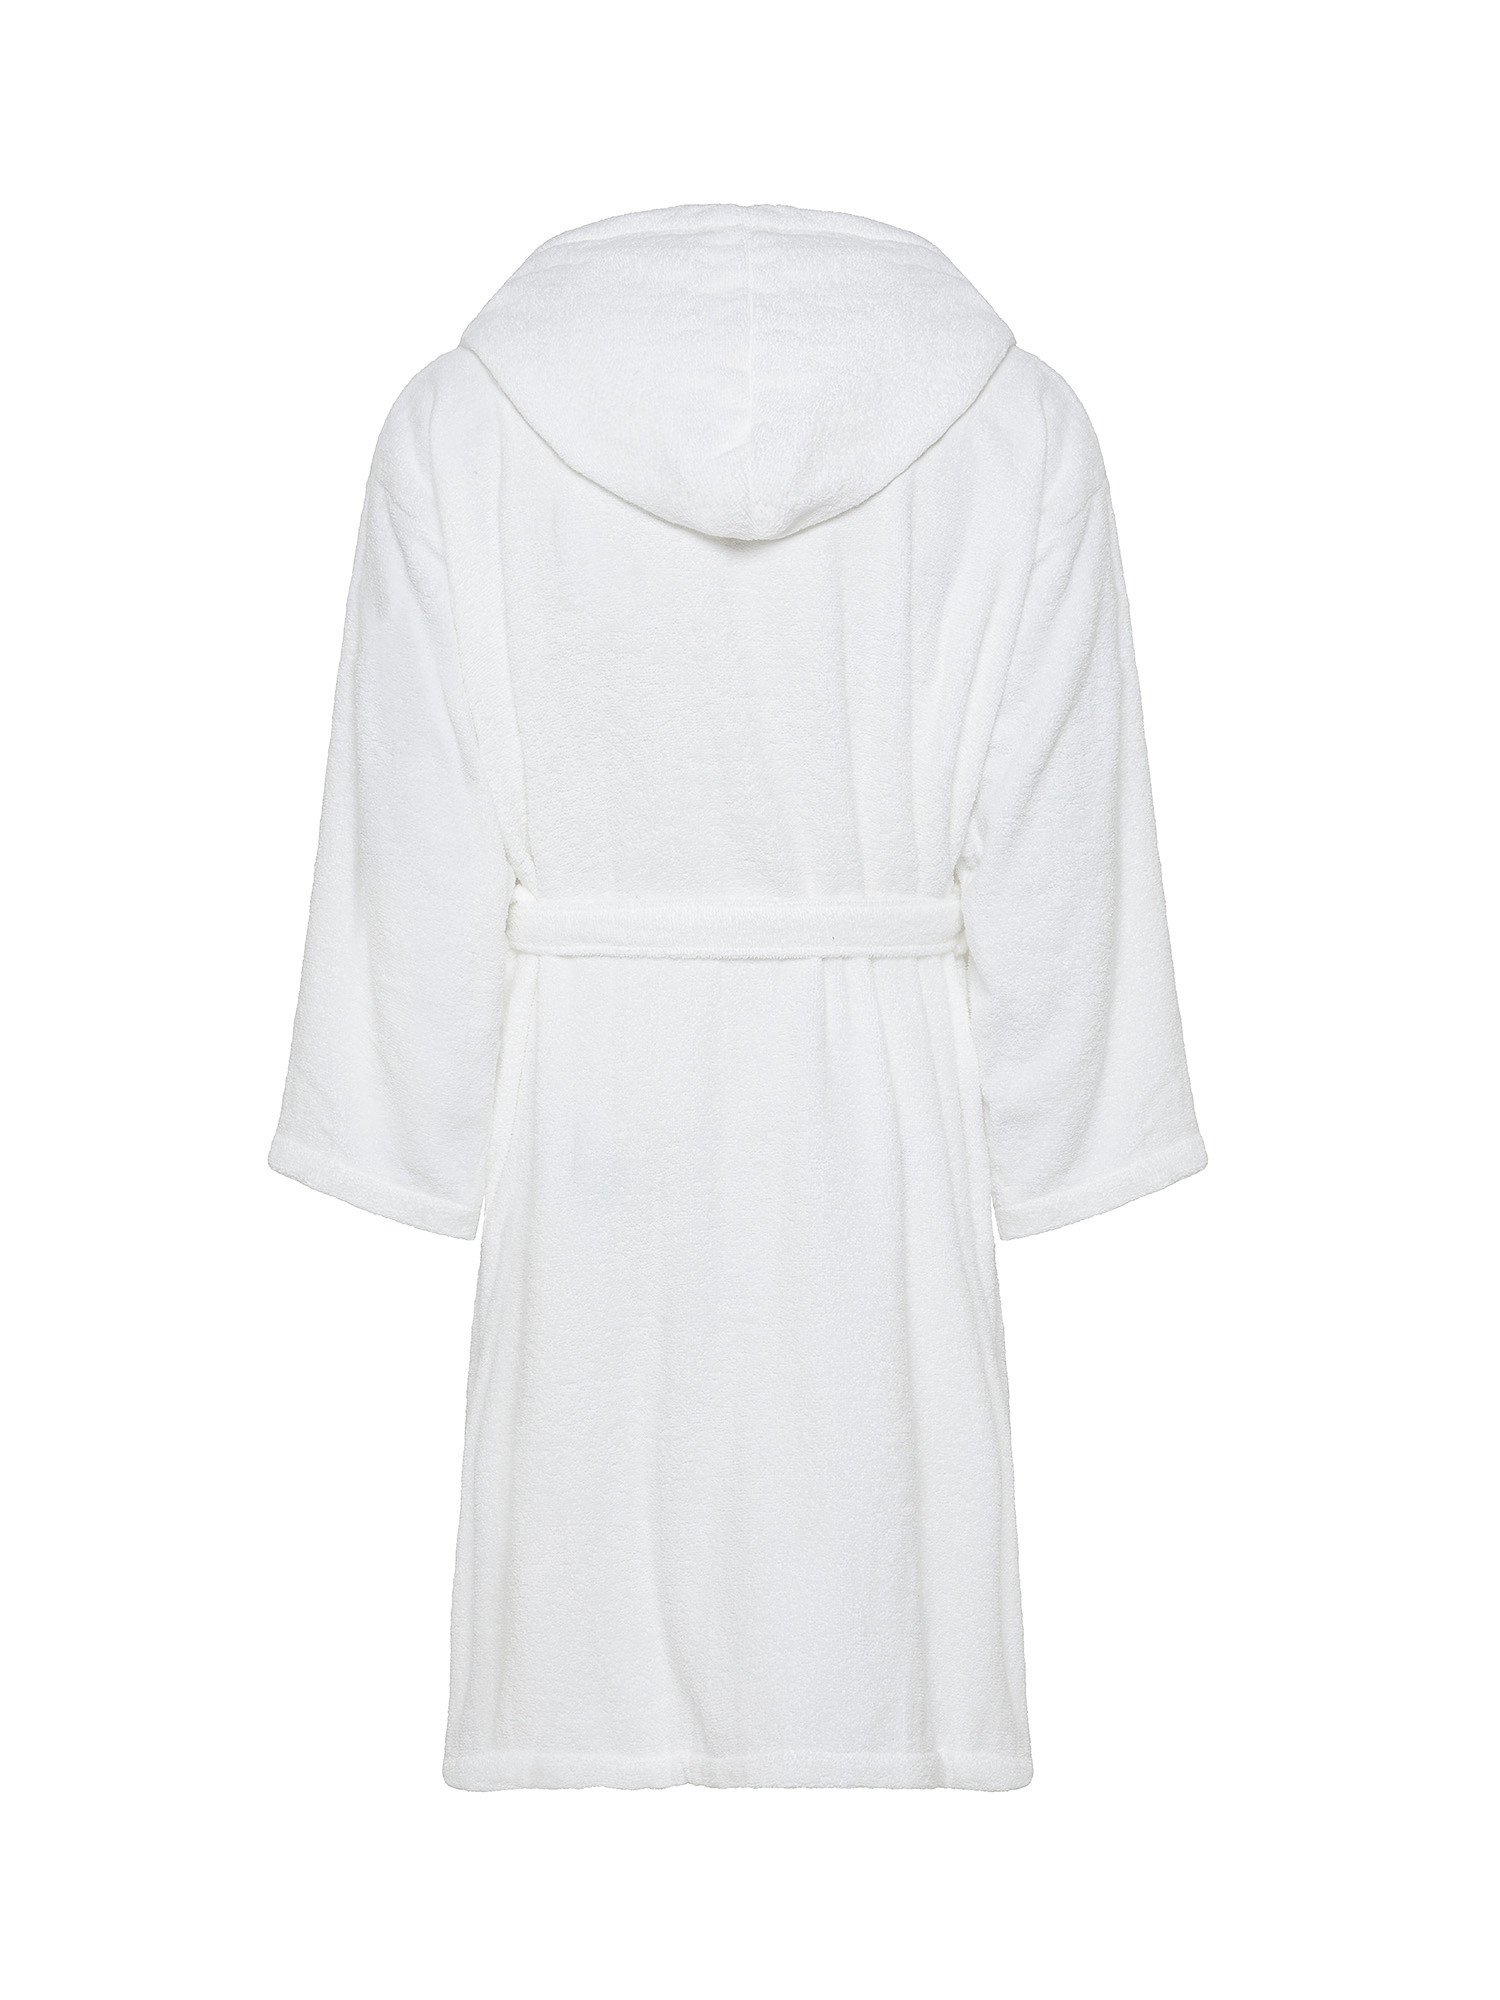 Bathrobe with hood in solid color pure cotton terry, White, large image number 1